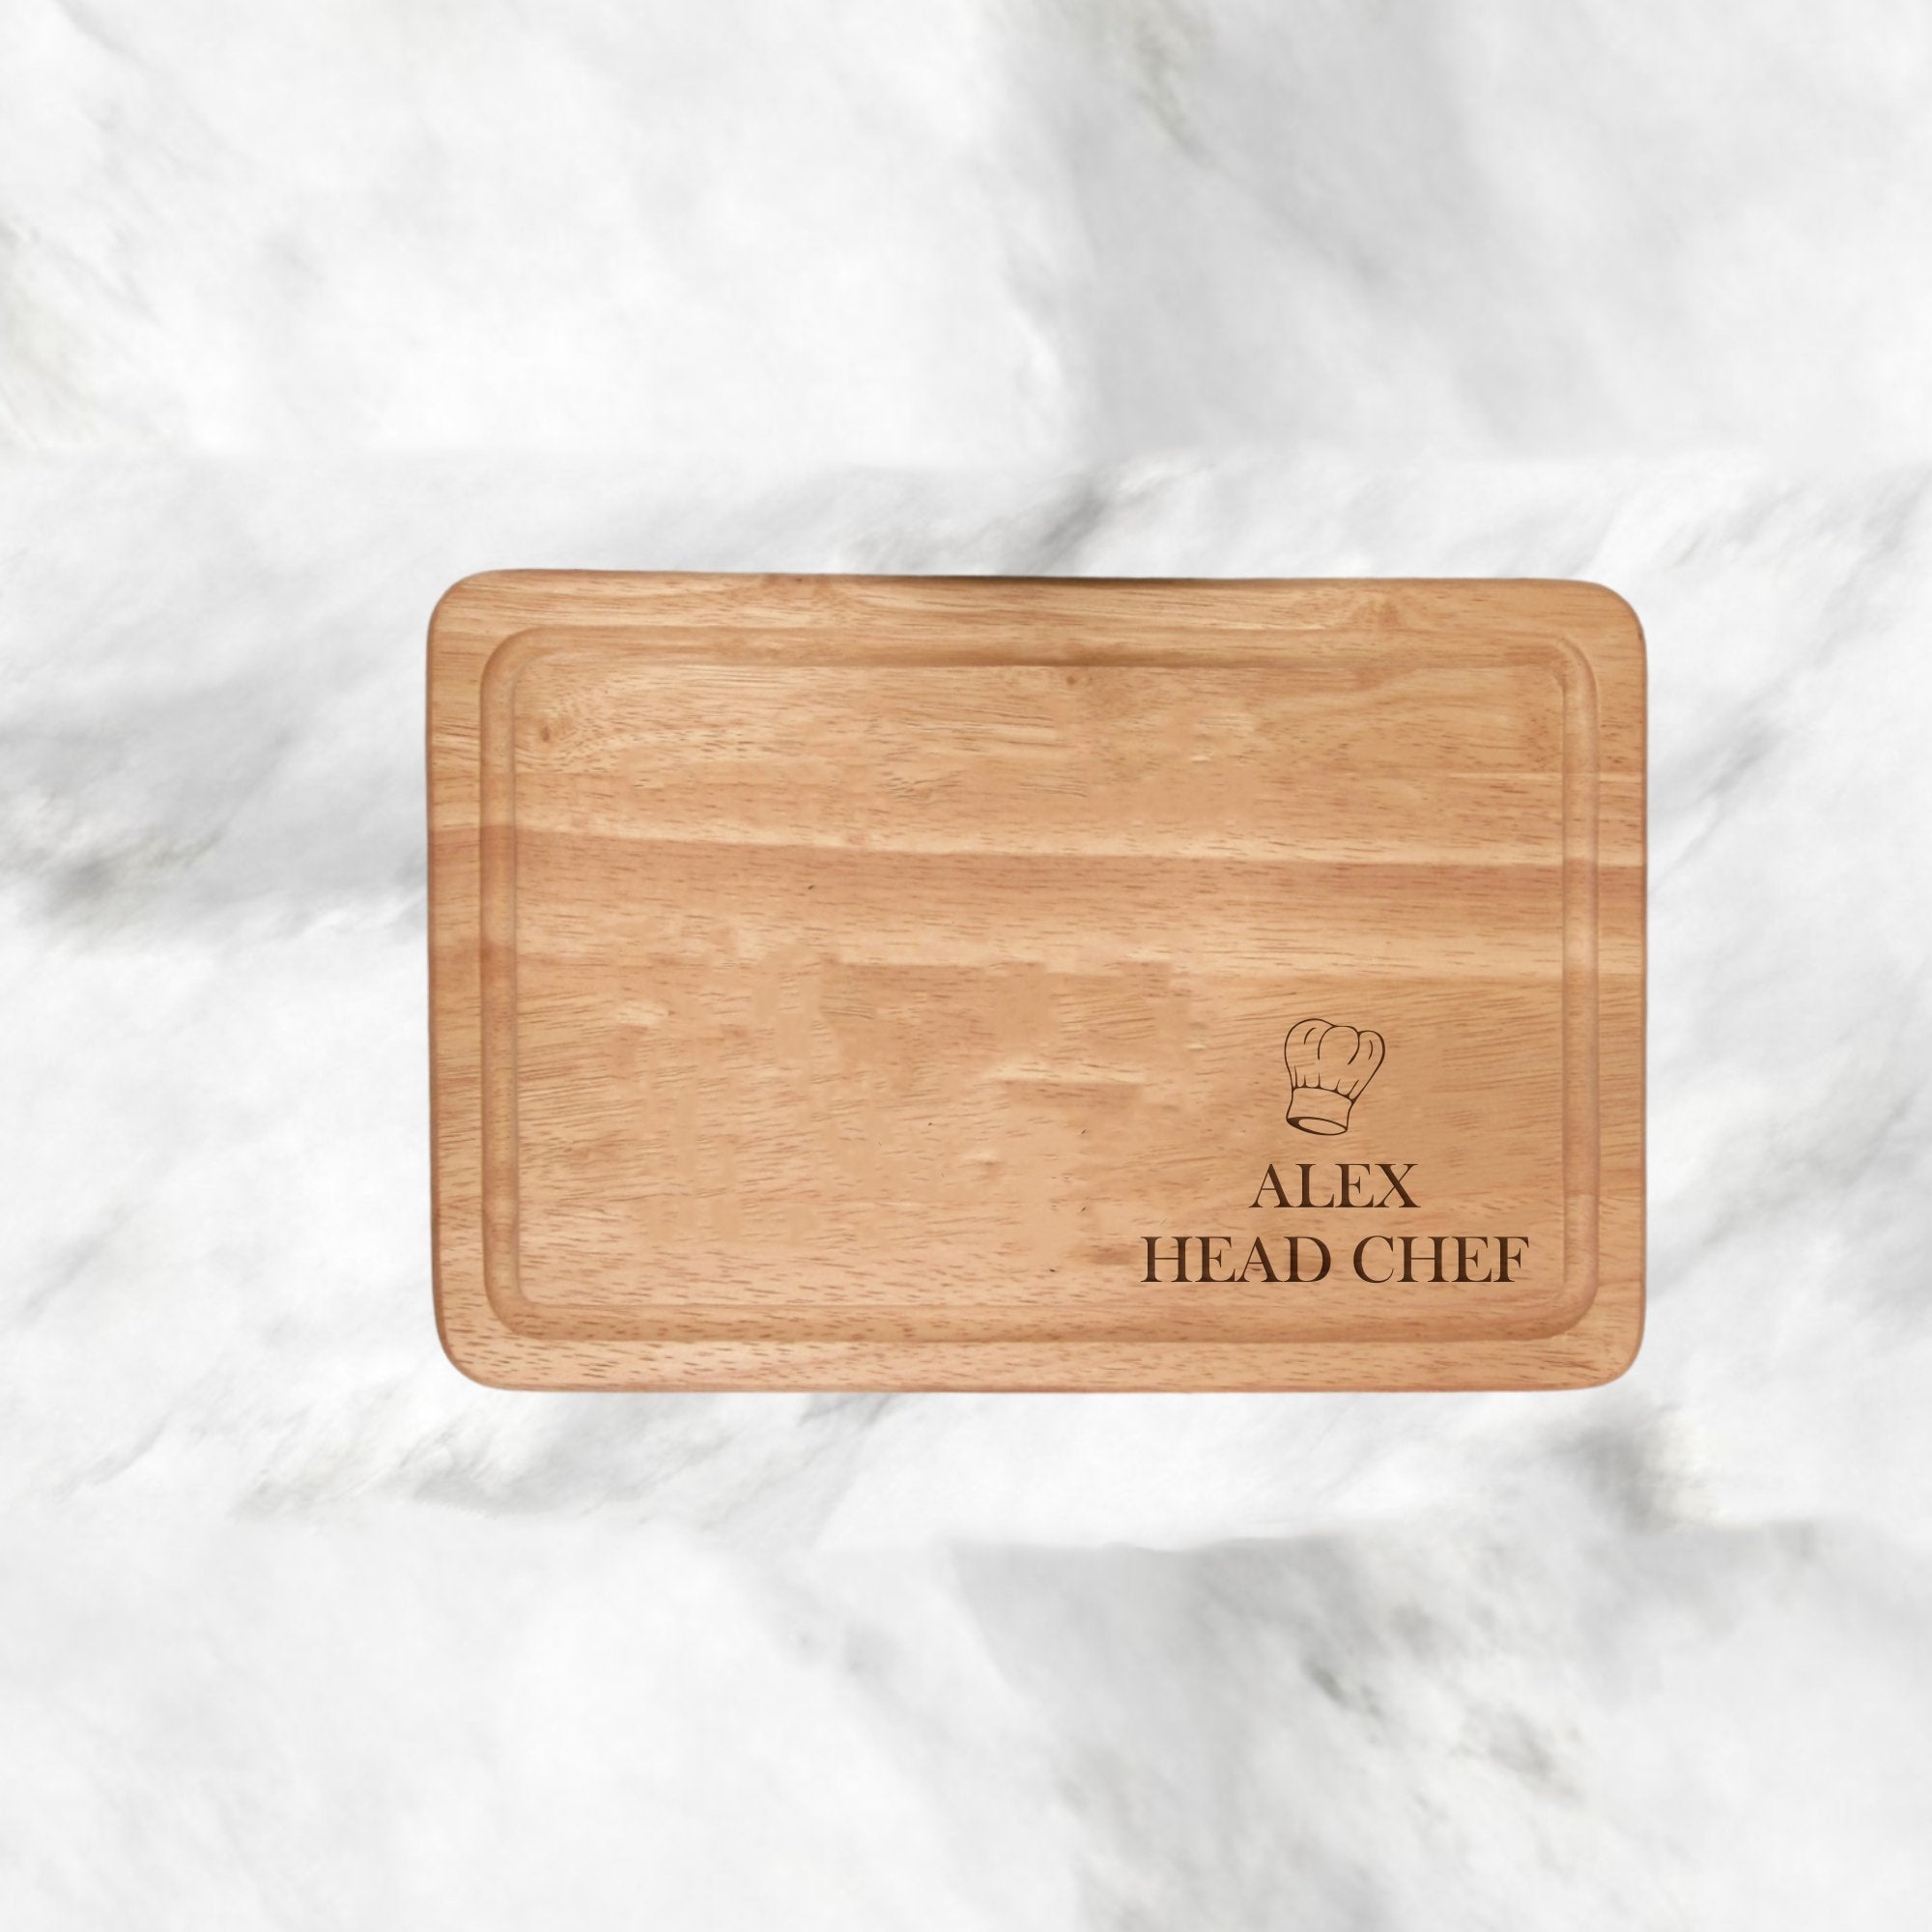 Upgrade your kitchen with our Chef Hat Design Personalised Chopping Board, a blend of style and sentiment. Ideal for any occasion, this 300mmX200mm Hevea Wood board adds a personal touch to your cooking. Enjoy a special culinary experience every time, from day-to-day to special occasions. Hand-wash only for lasting charm.